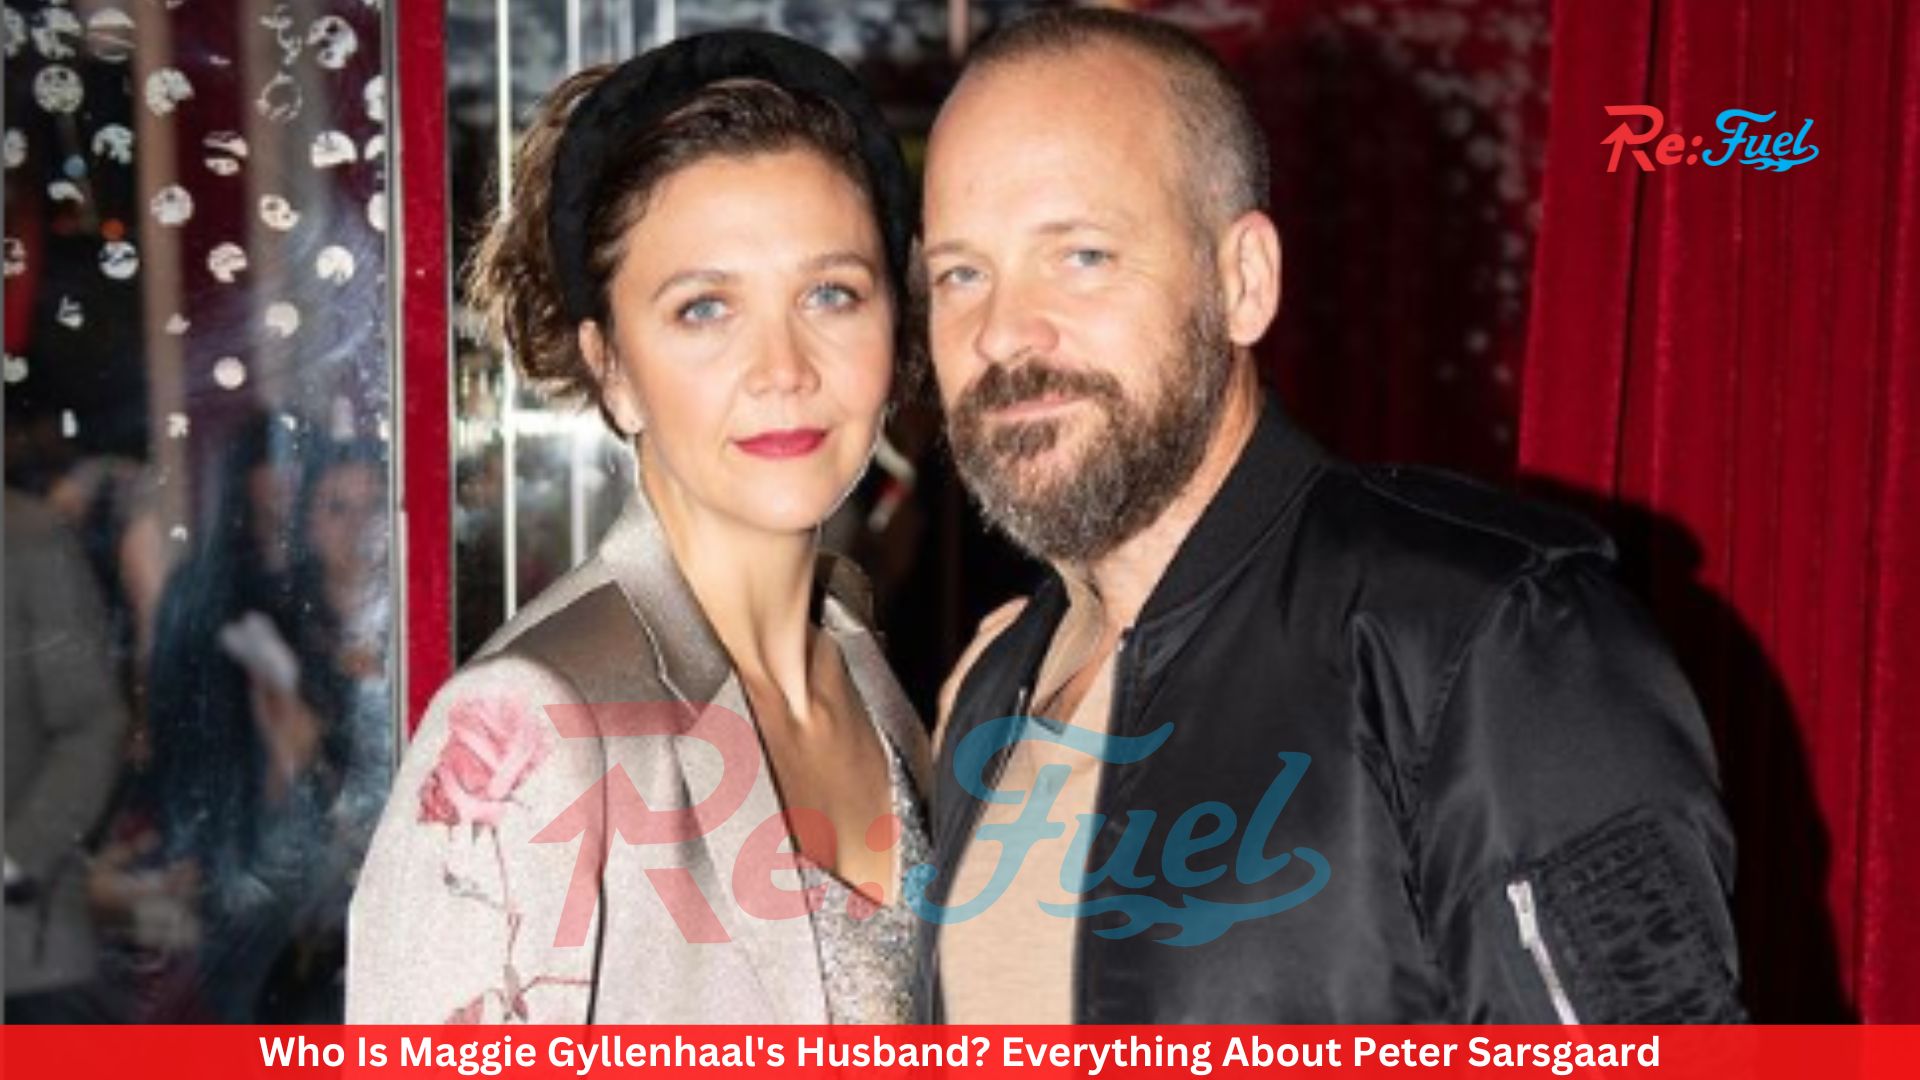 Who Is Maggie Gyllenhaal's Husband? Everything About Peter Sarsgaard